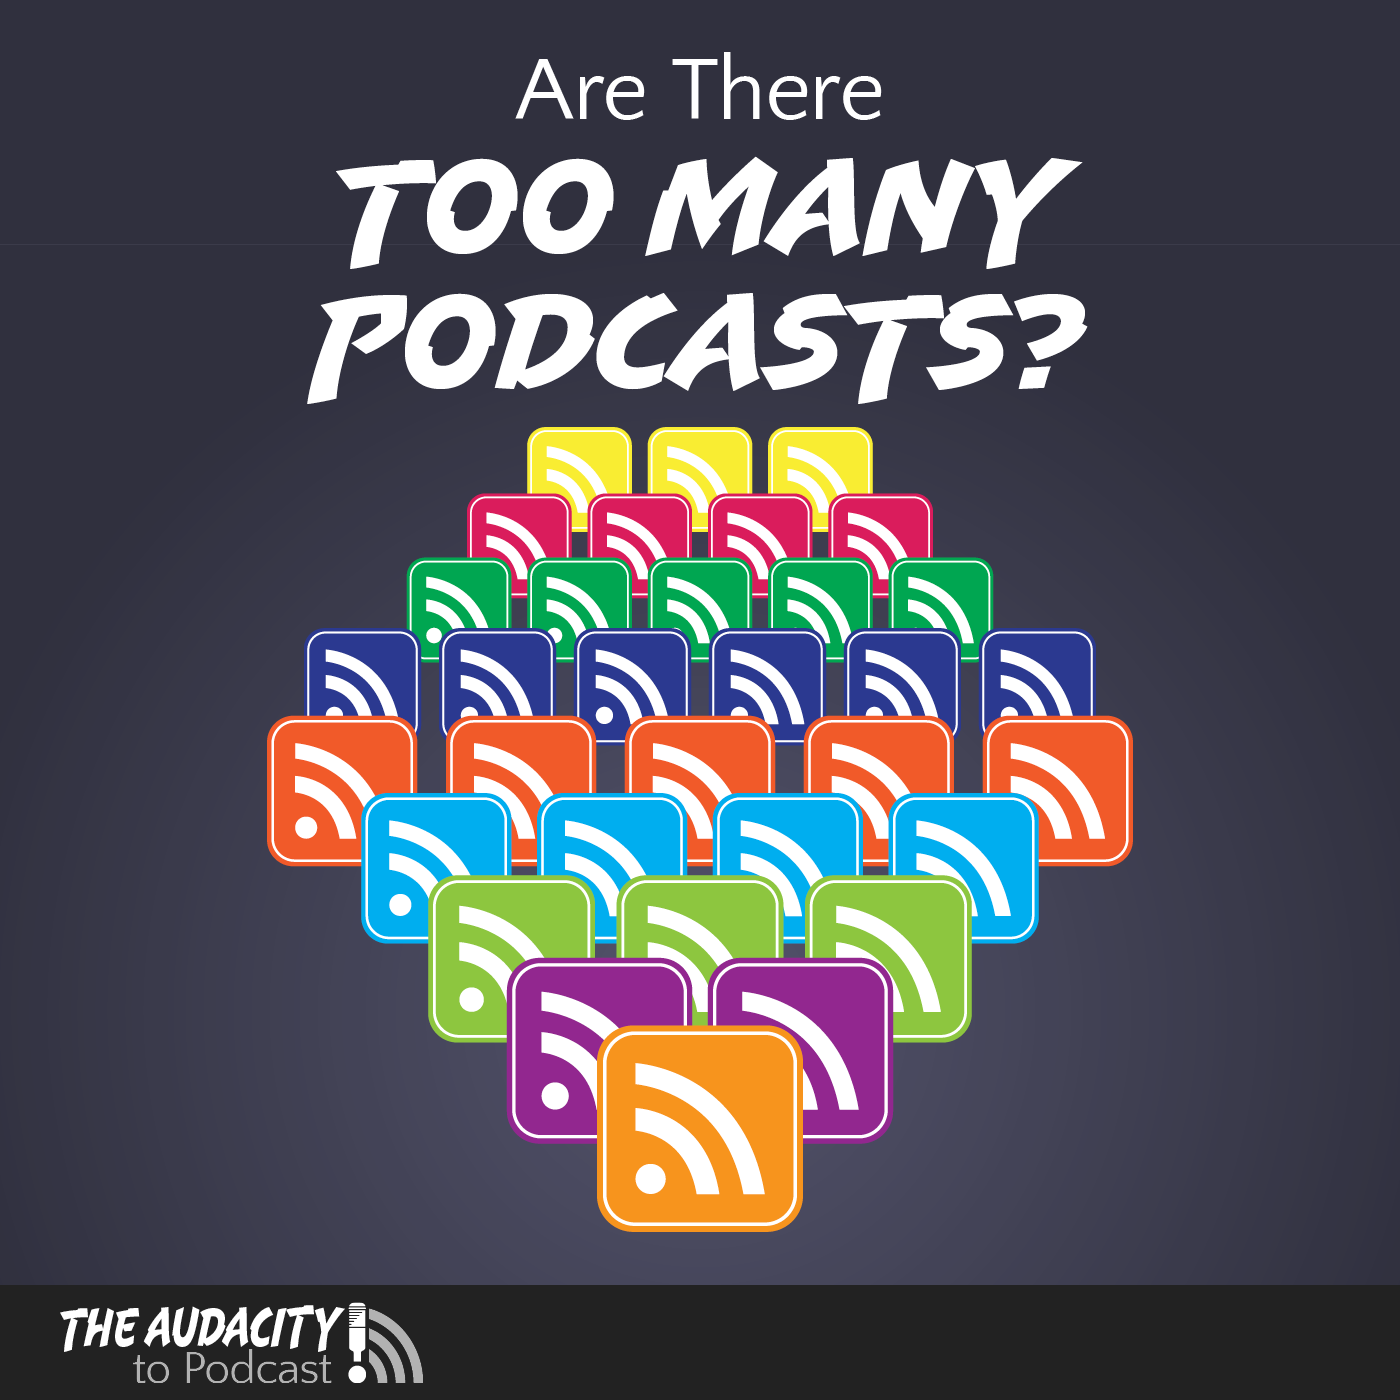 Are There Too Many Podcasts?